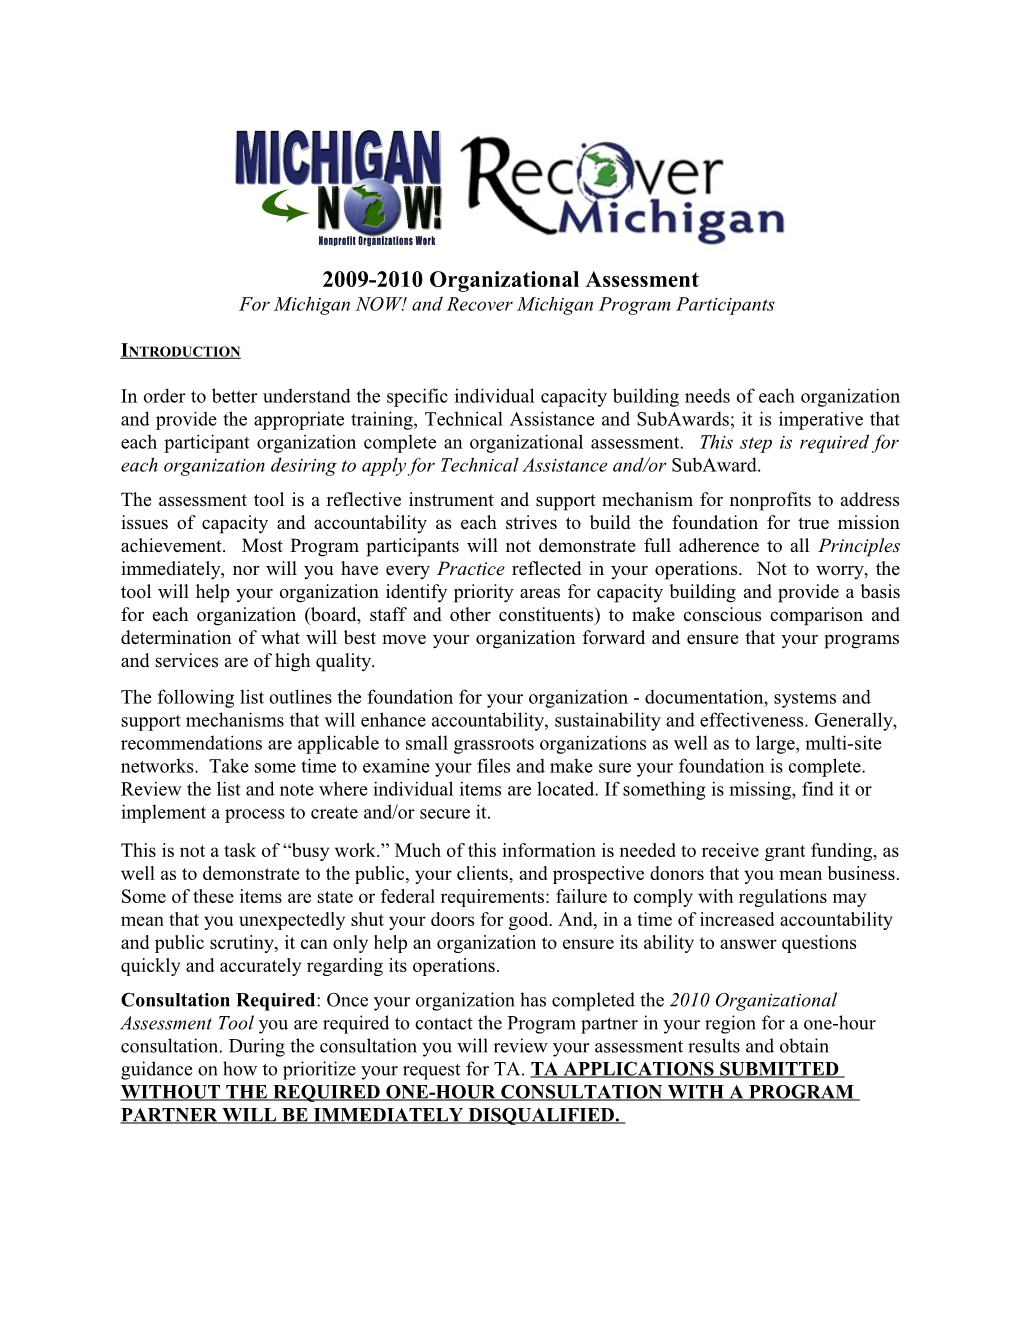 For Michigannow! and Recover Michigan Program Participants